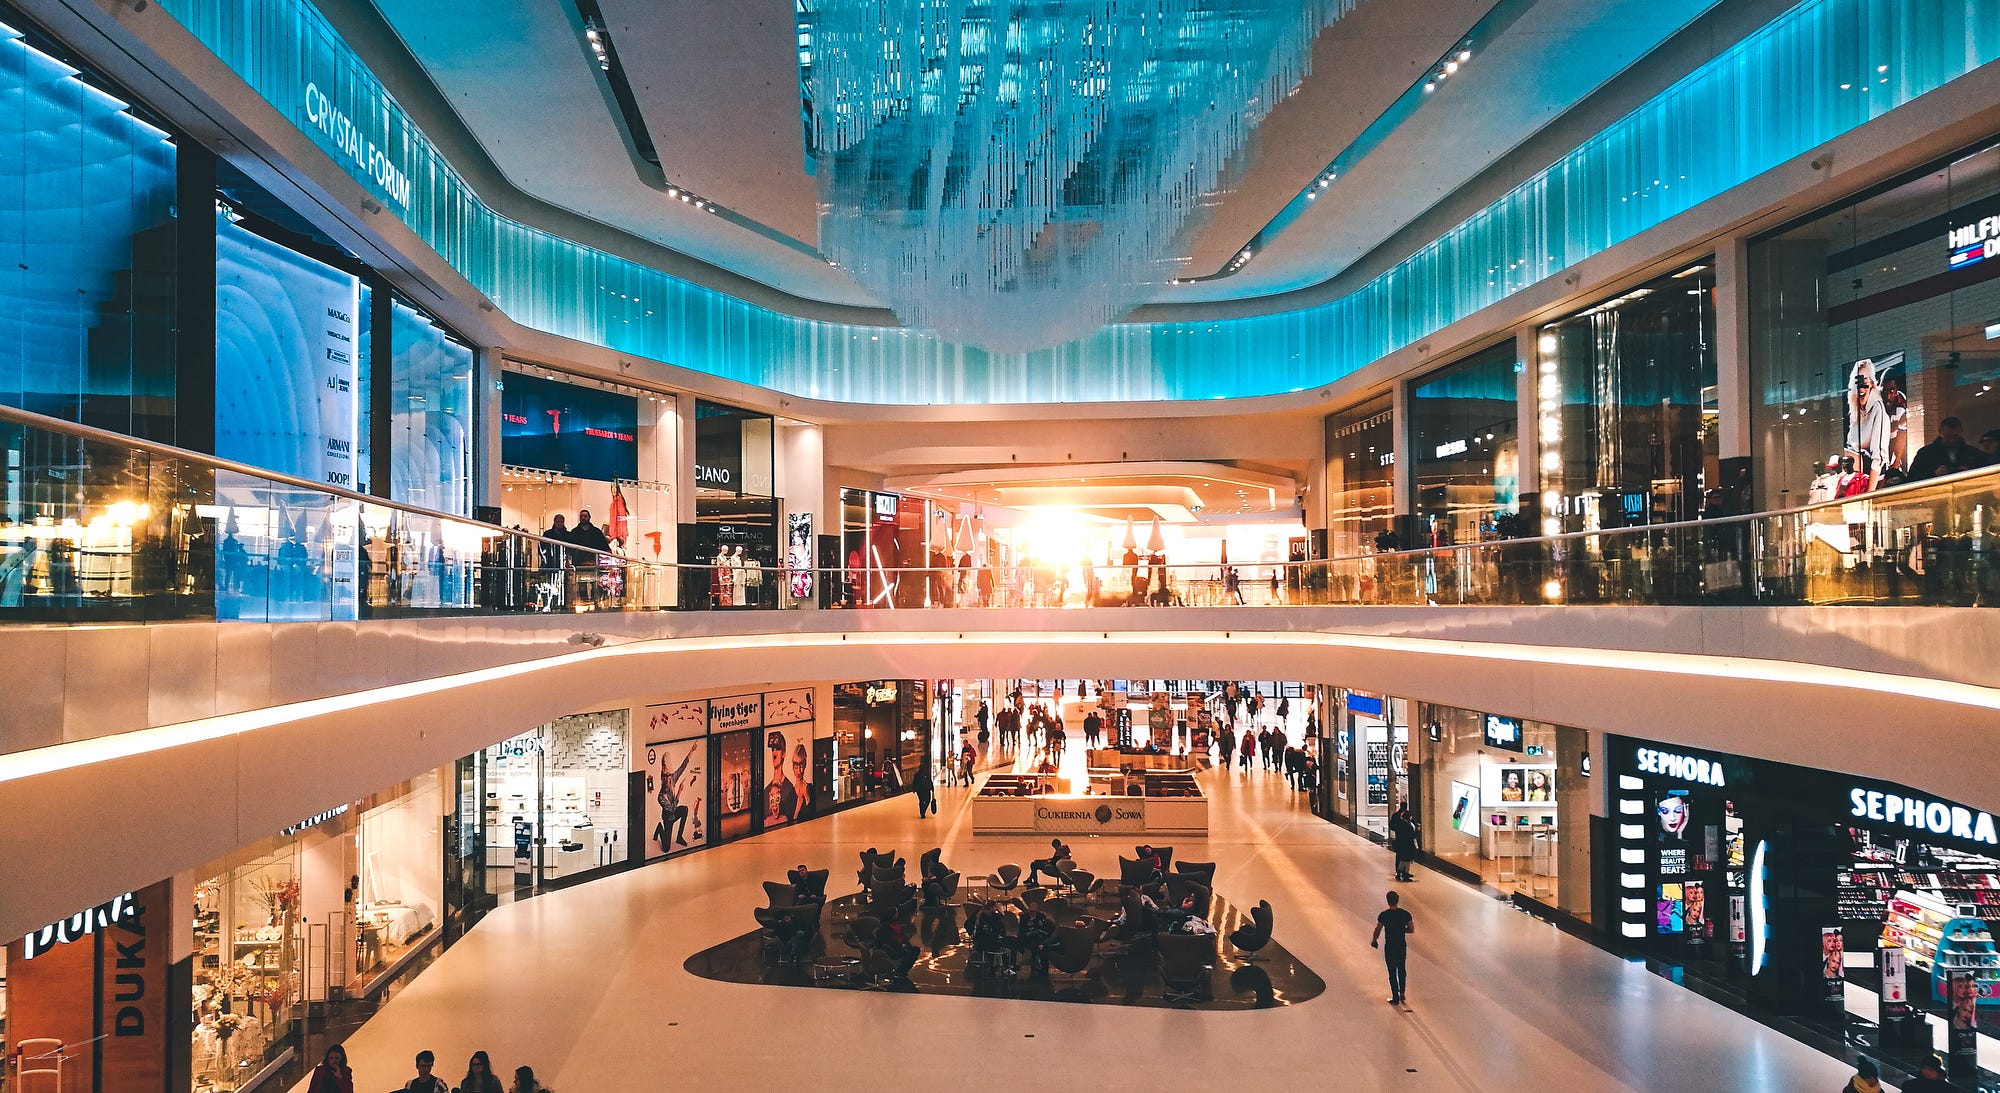 Case study: Navigating shopping malls with augmented reality | by Grishma  Vartak | Bootcamp